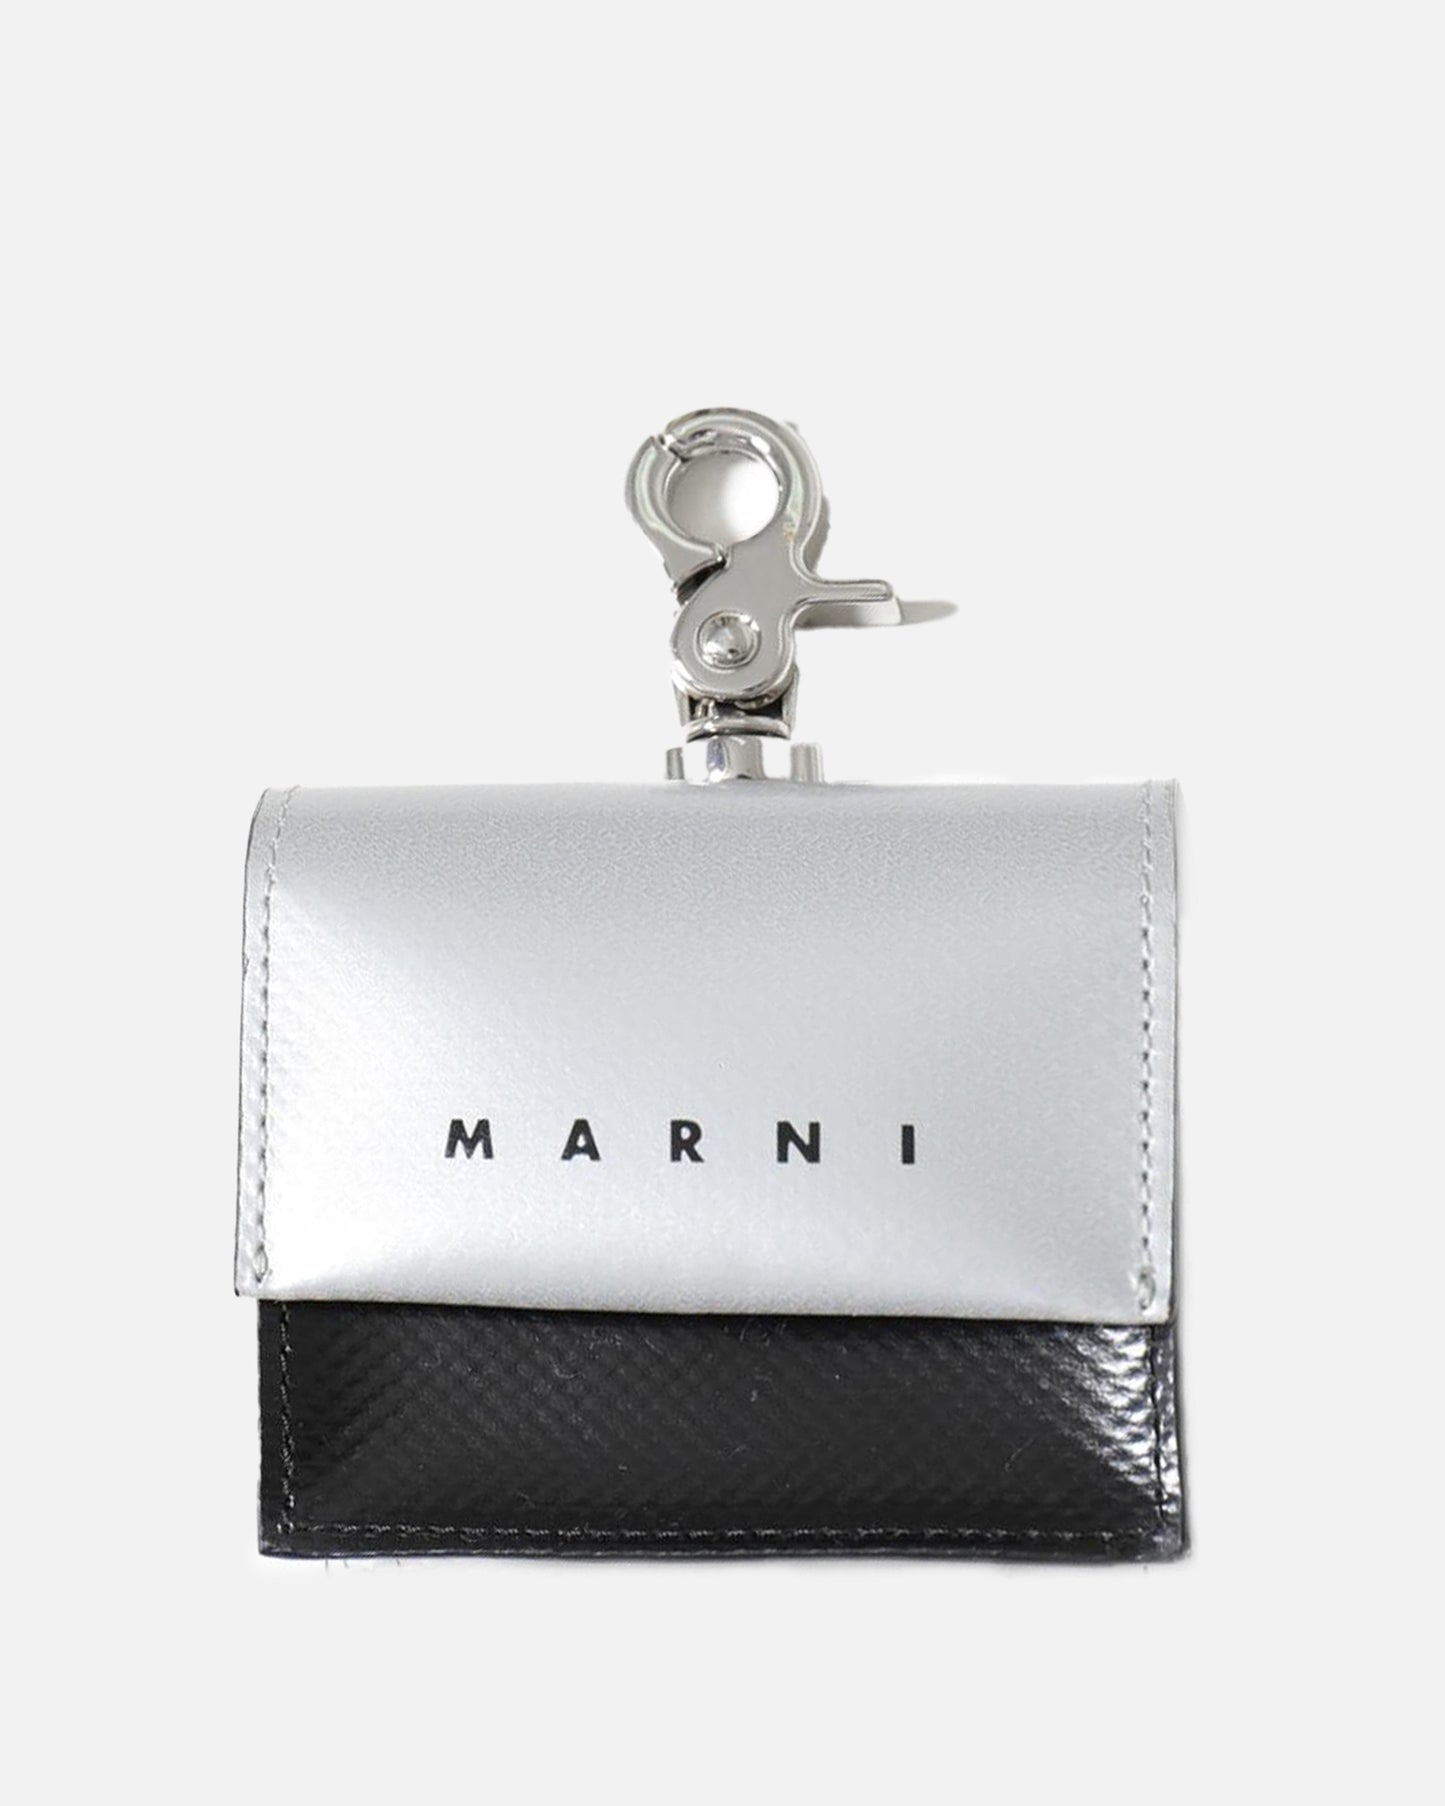 Marni Leather Goods AirPods Case in Silver/Black